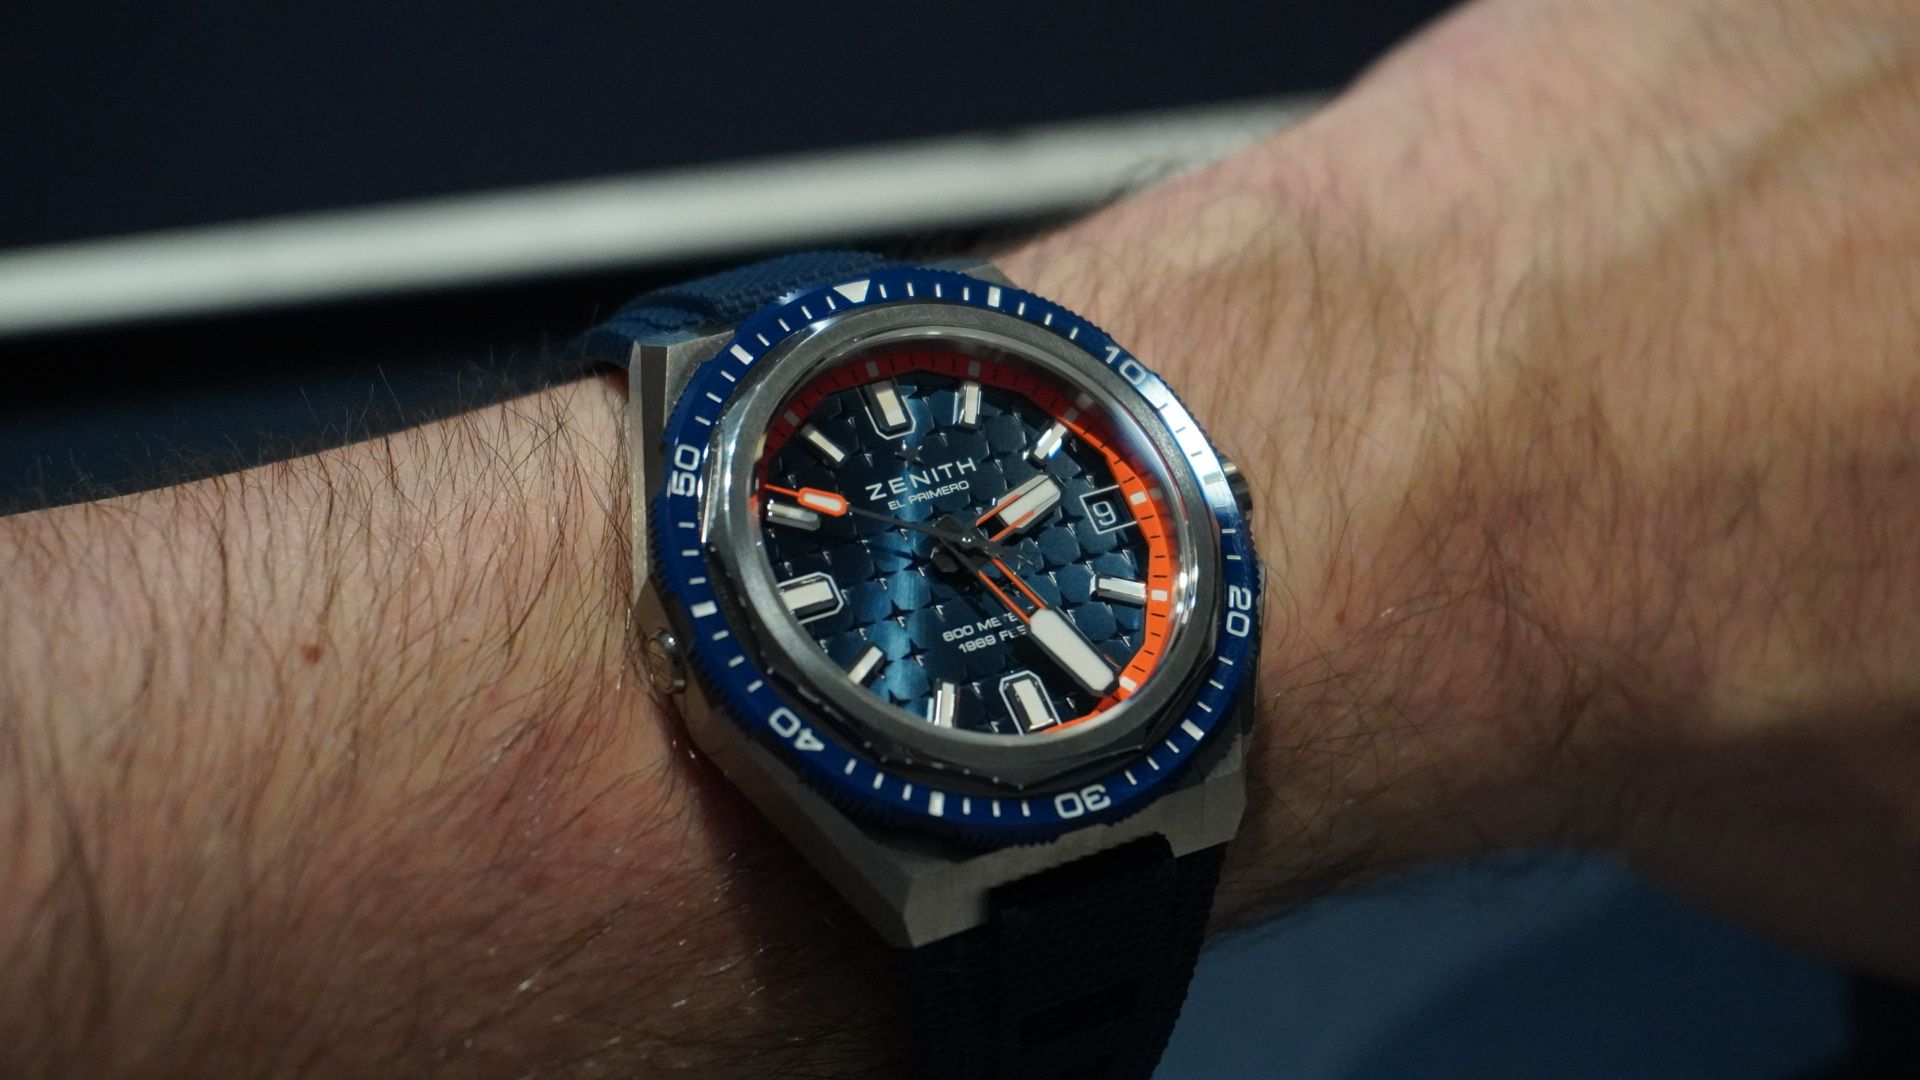 hands on with the zenith defy extreme diver – a stunning, stylish dive watch